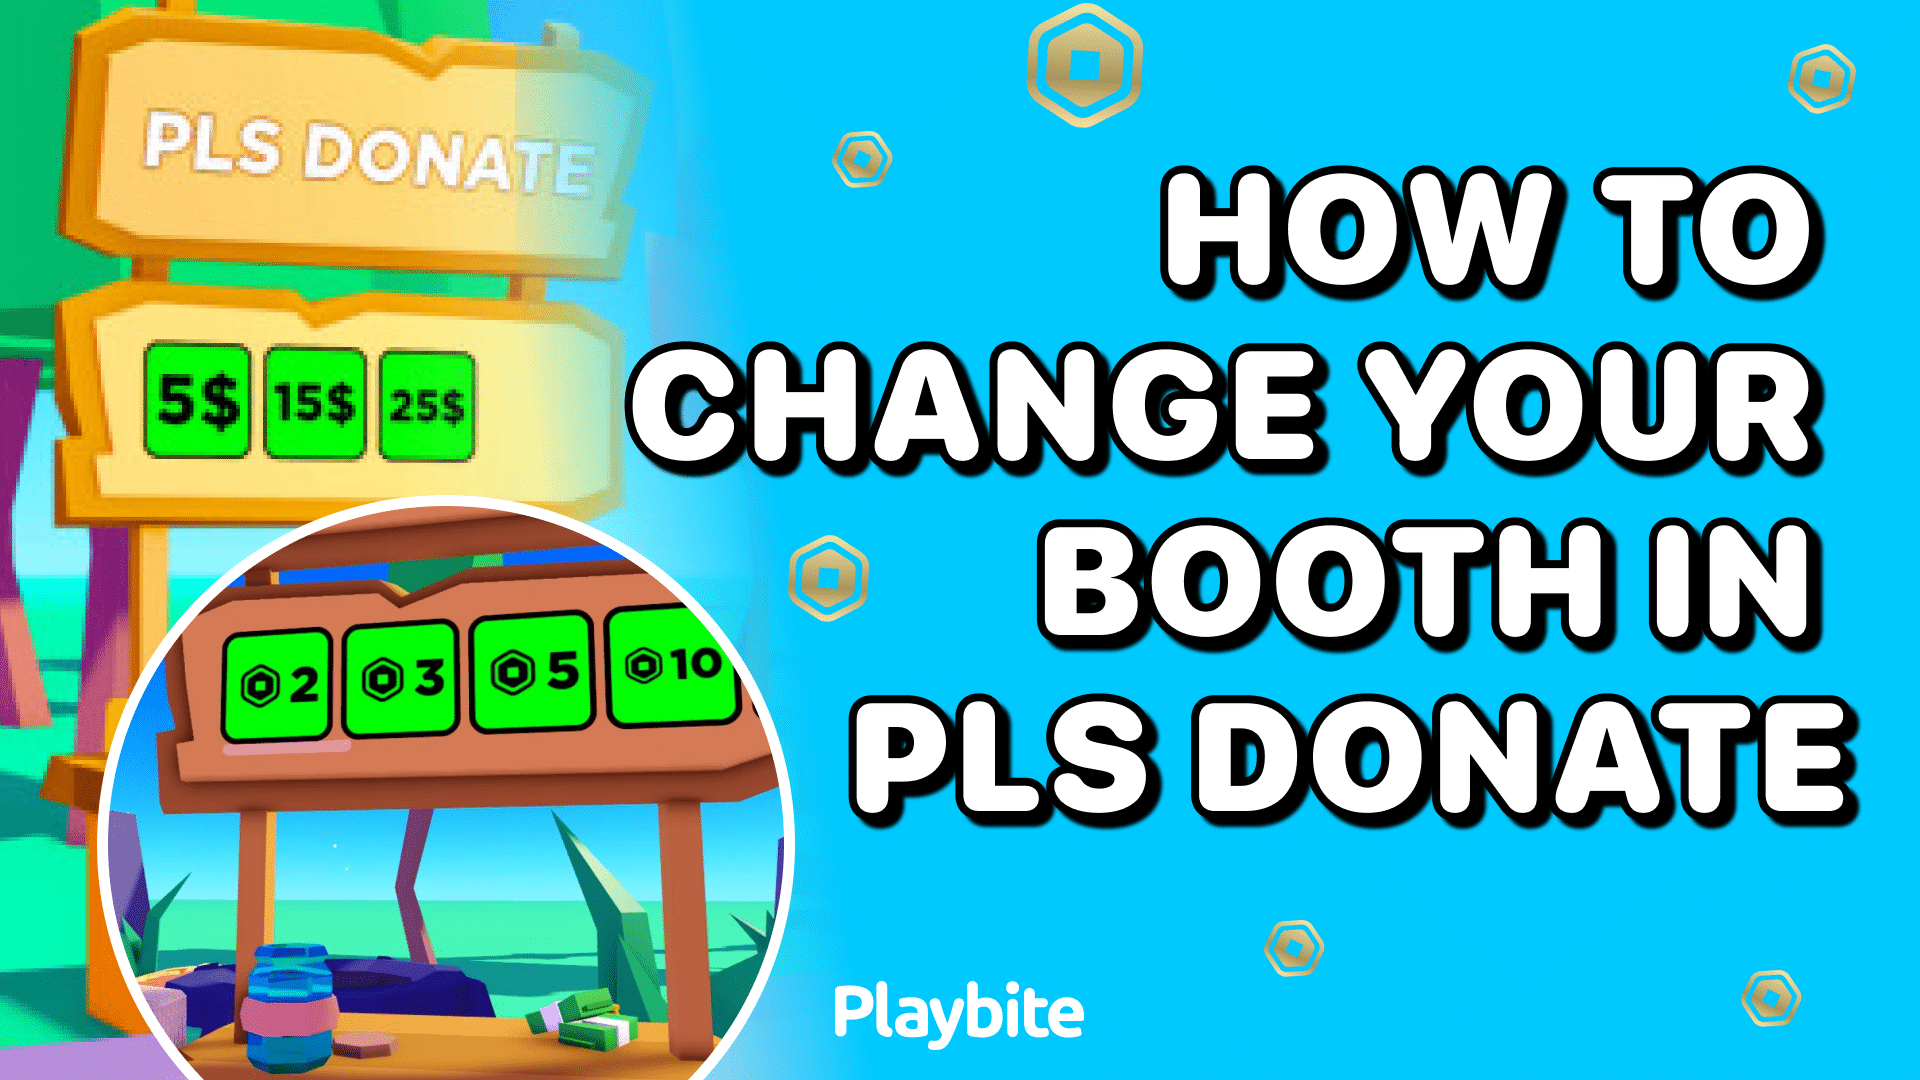 How To Change Your Booth In PLS DONATE